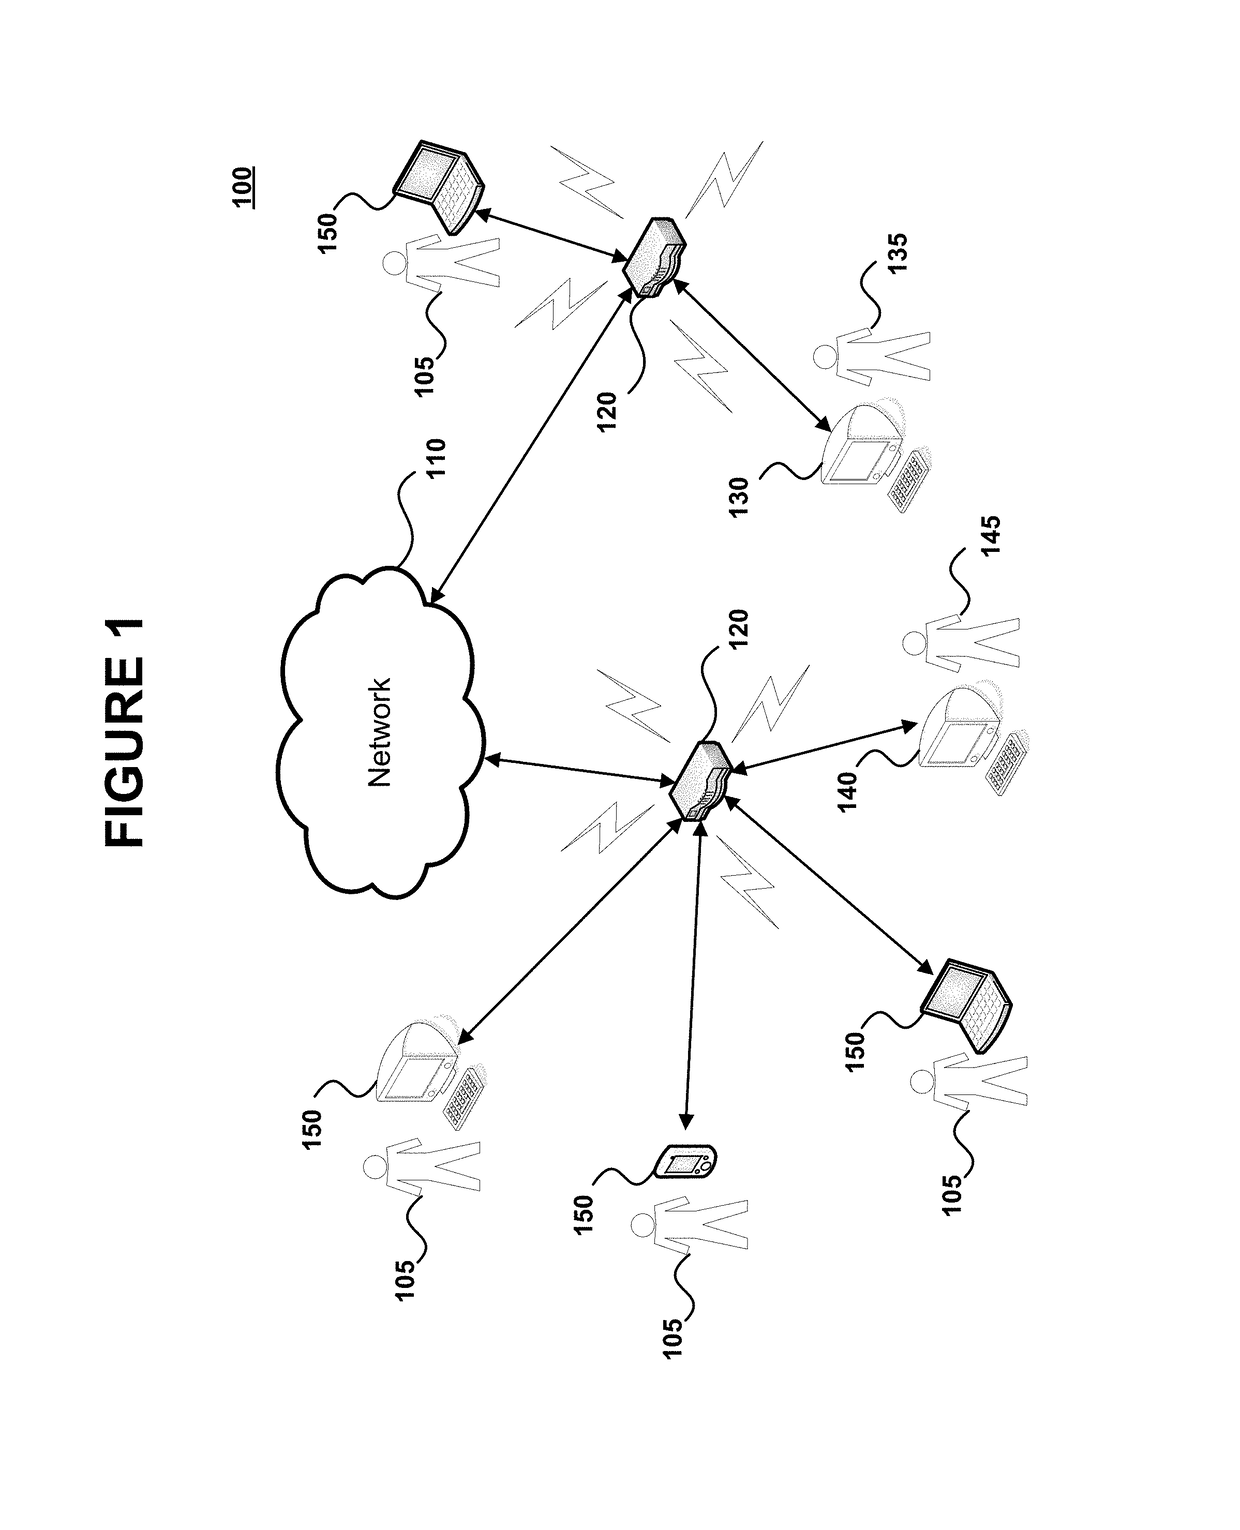 Systems and methods for authenticating users accessing a secure network with one-session-only, on-demand login credentials